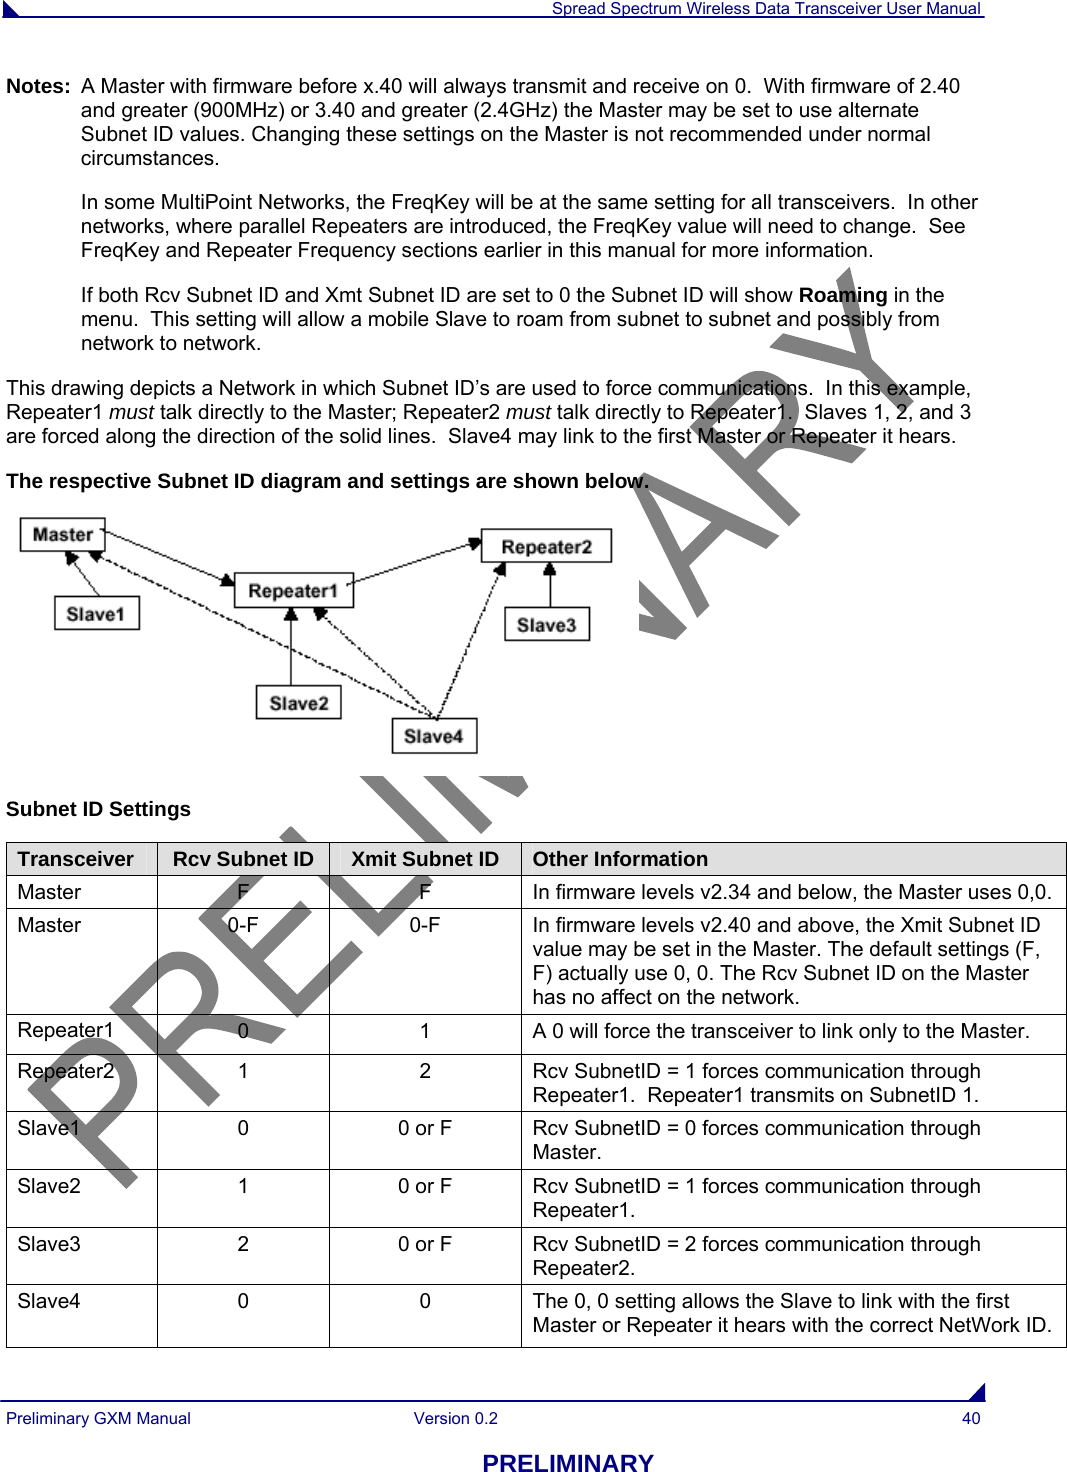  Spread Spectrum Wireless Data Transceiver User Manual Preliminary GXM Manual  Version 0.2  40 PRELIMINARY Notes:  A Master with firmware before x.40 will always transmit and receive on 0.  With firmware of 2.40 and greater (900MHz) or 3.40 and greater (2.4GHz) the Master may be set to use alternate Subnet ID values. Changing these settings on the Master is not recommended under normal circumstances. In some MultiPoint Networks, the FreqKey will be at the same setting for all transceivers.  In other networks, where parallel Repeaters are introduced, the FreqKey value will need to change.  See FreqKey and Repeater Frequency sections earlier in this manual for more information. If both Rcv Subnet ID and Xmt Subnet ID are set to 0 the Subnet ID will show Roaming in the menu.  This setting will allow a mobile Slave to roam from subnet to subnet and possibly from network to network.  This drawing depicts a Network in which Subnet ID’s are used to force communications.  In this example, Repeater1 must talk directly to the Master; Repeater2 must talk directly to Repeater1.  Slaves 1, 2, and 3 are forced along the direction of the solid lines.  Slave4 may link to the first Master or Repeater it hears.  The respective Subnet ID diagram and settings are shown below.                                                                                Subnet ID Settings Transceiver  Rcv Subnet ID  Xmit Subnet ID  Other Information Master  F  F  In firmware levels v2.34 and below, the Master uses 0,0. Master  0-F 0-F In firmware levels v2.40 and above, the Xmit Subnet ID value may be set in the Master. The default settings (F, F) actually use 0, 0. The Rcv Subnet ID on the Master has no affect on the network. Repeater1  0  1  A 0 will force the transceiver to link only to the Master. Repeater2  1 2 Rcv SubnetID = 1 forces communication through Repeater1.  Repeater1 transmits on SubnetID 1. Slave1  0  0 or F  Rcv SubnetID = 0 forces communication through Master. Slave2  1  0 or F  Rcv SubnetID = 1 forces communication through Repeater1. Slave3  2  0 or F  Rcv SubnetID = 2 forces communication through Repeater2. Slave4  0 0 The 0, 0 setting allows the Slave to link with the first Master or Repeater it hears with the correct NetWork ID.  